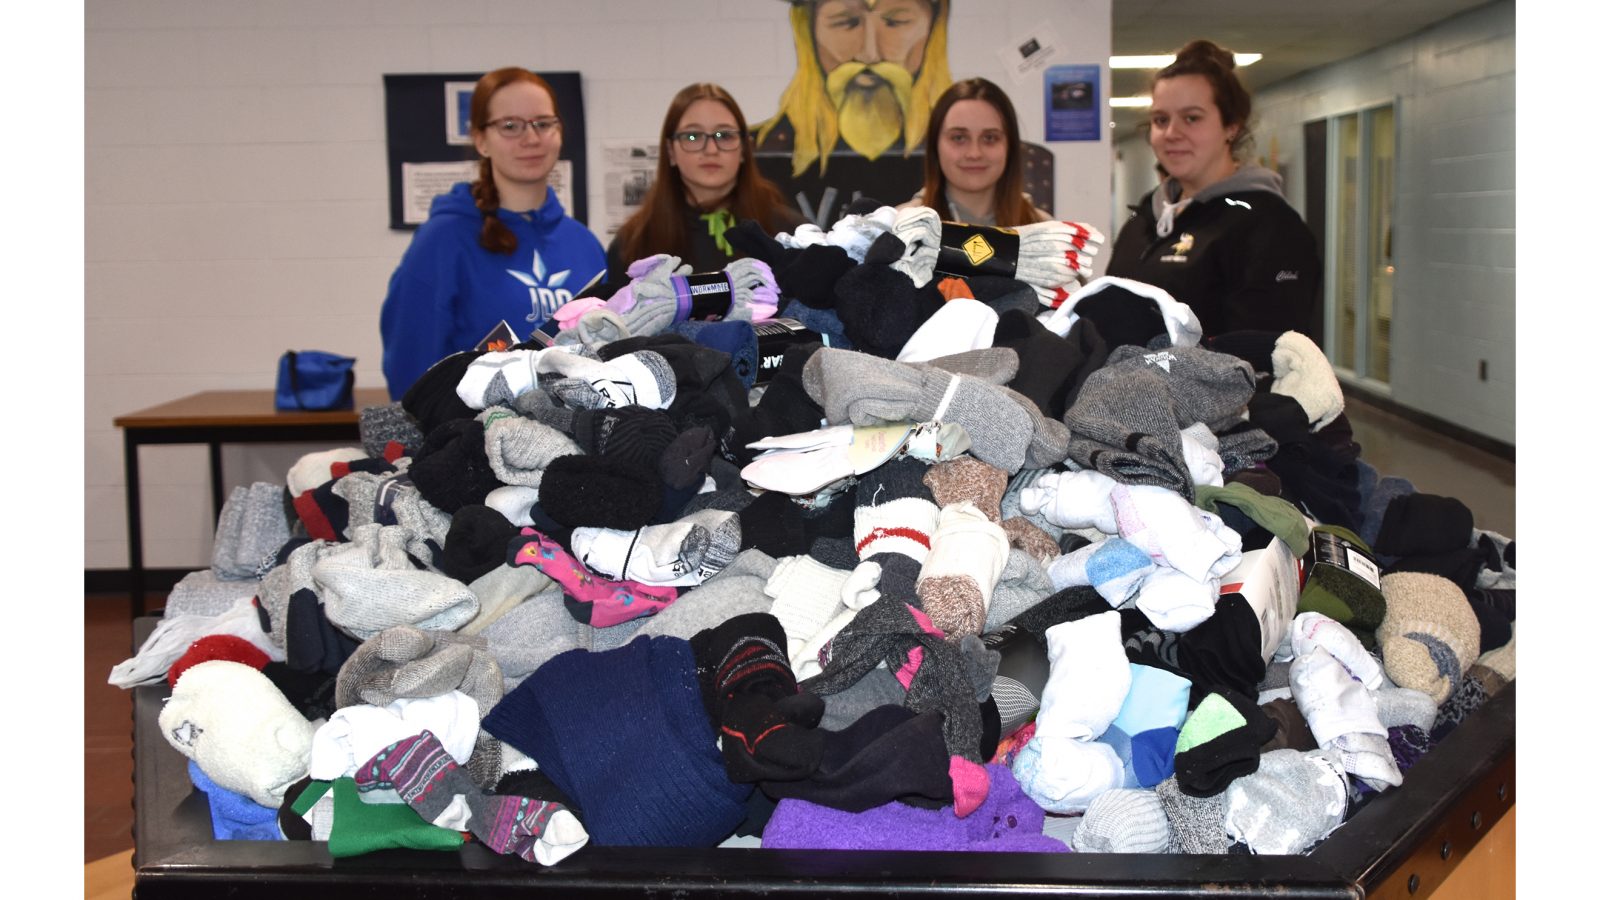 ETSB gathers 741 pairs of socks for homeless shelters